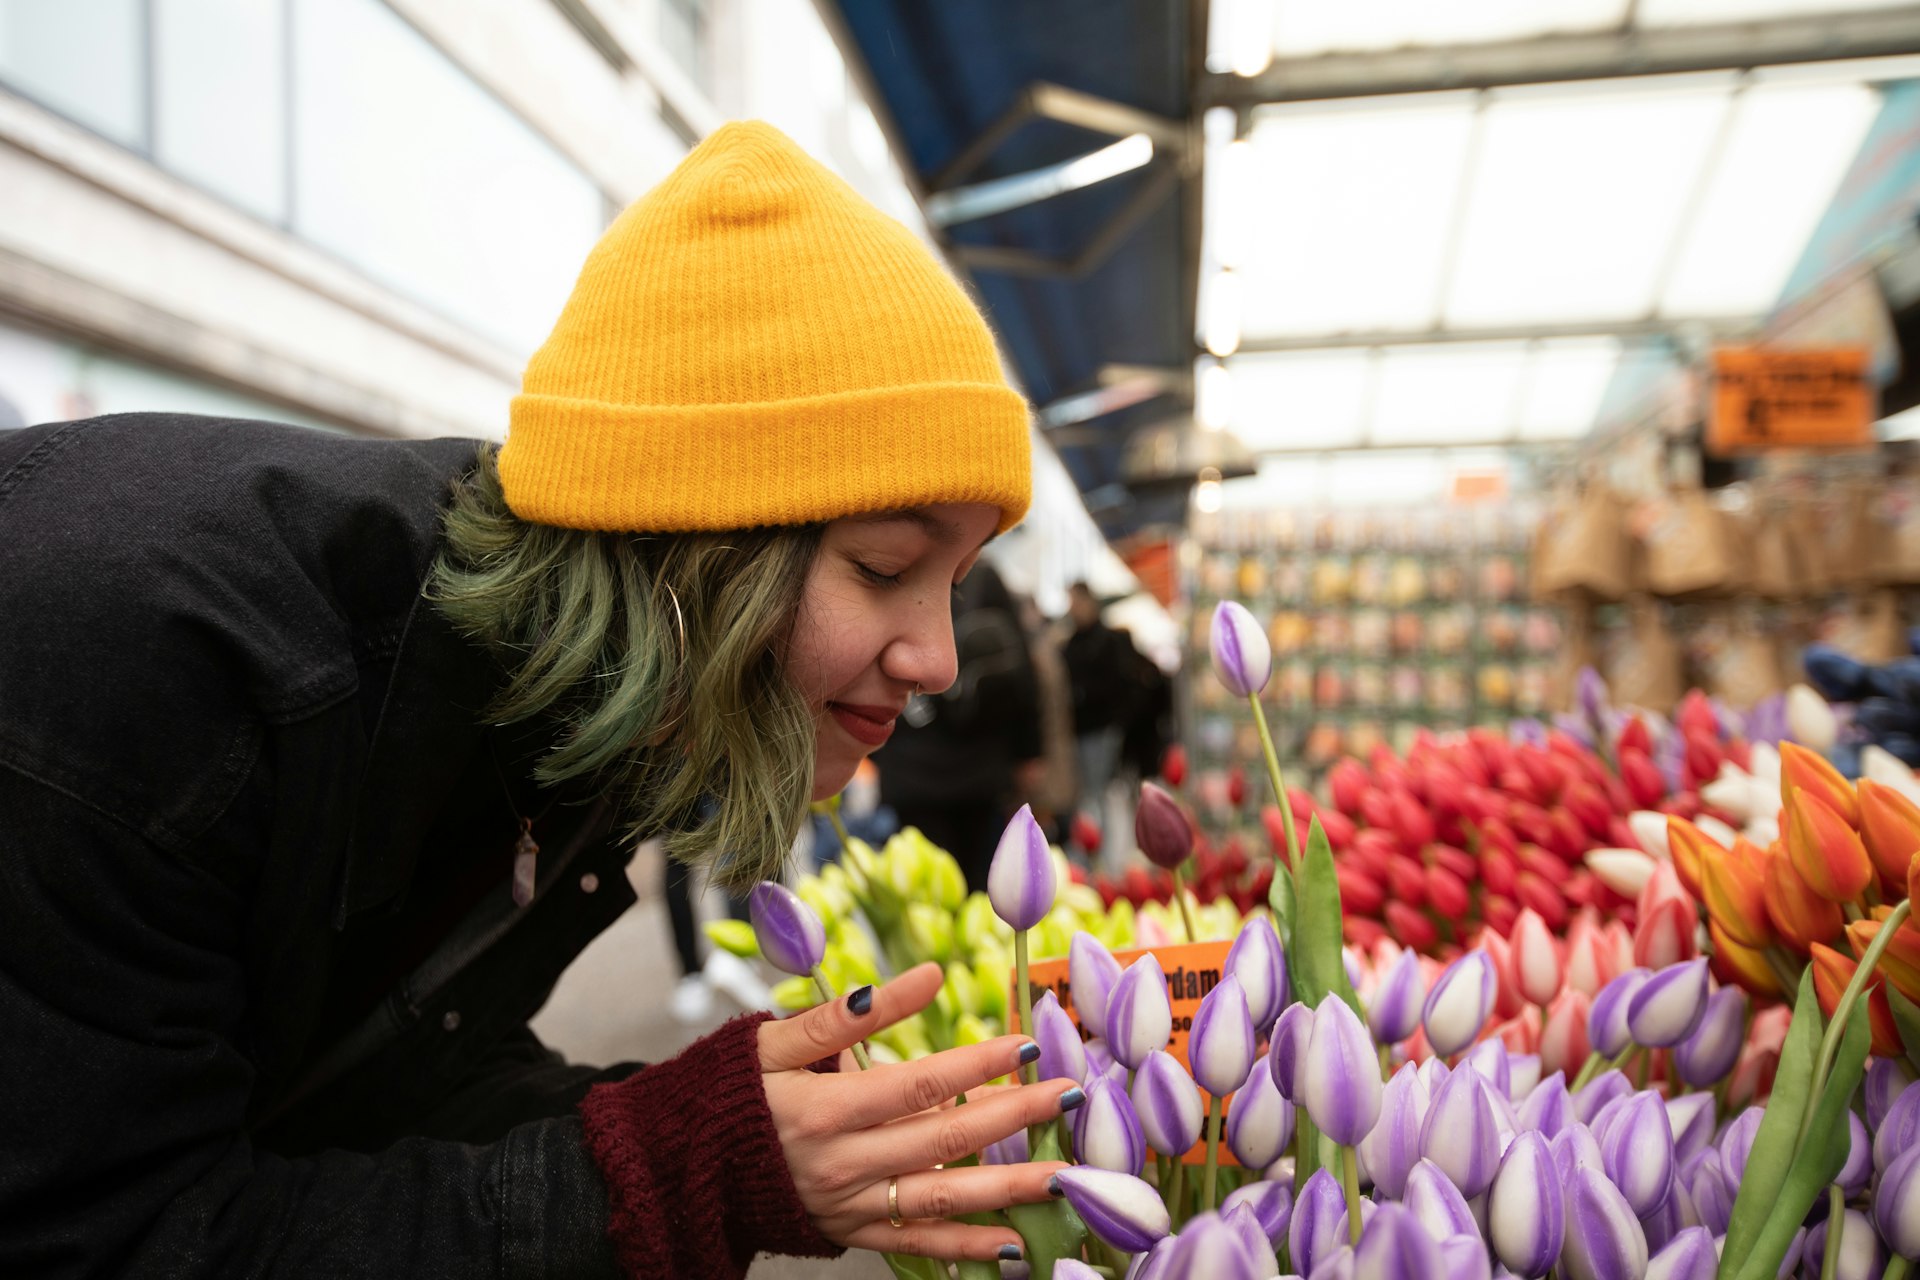 A woman wearing a yellow hat leans in to smell a bunch of tulips.